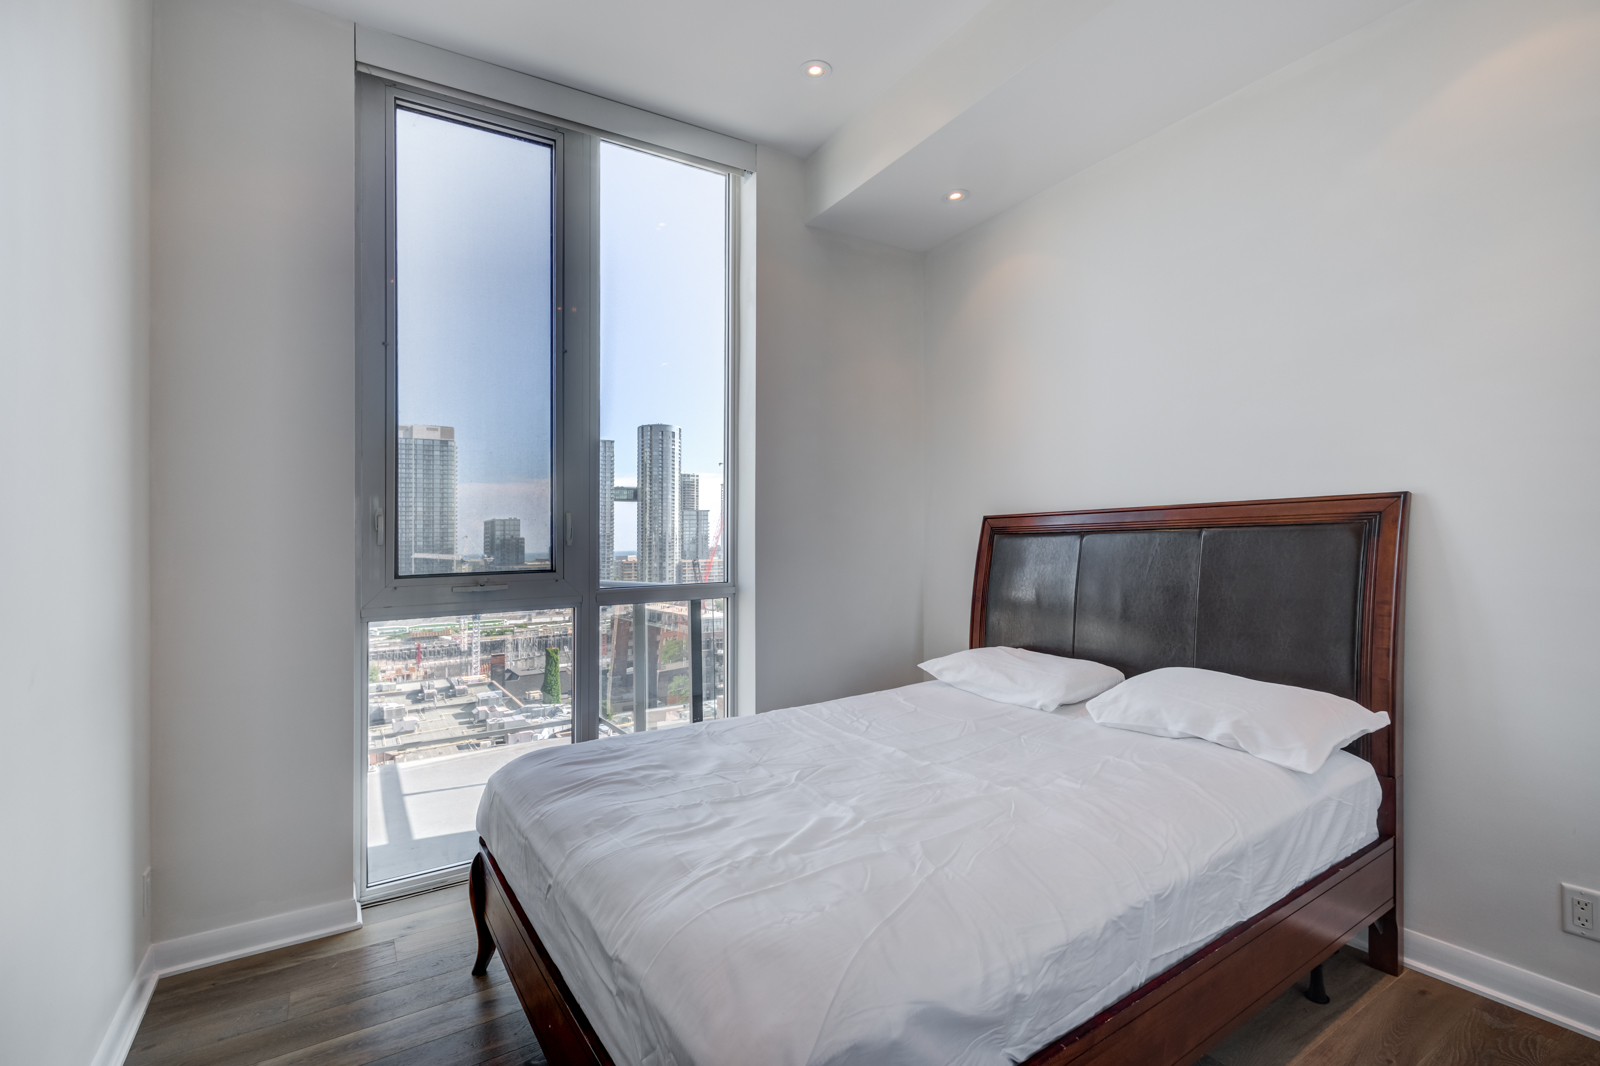 2nd bedroom and window view of Victory Lofts Penthouse Suite in 478 King St W Toronto.